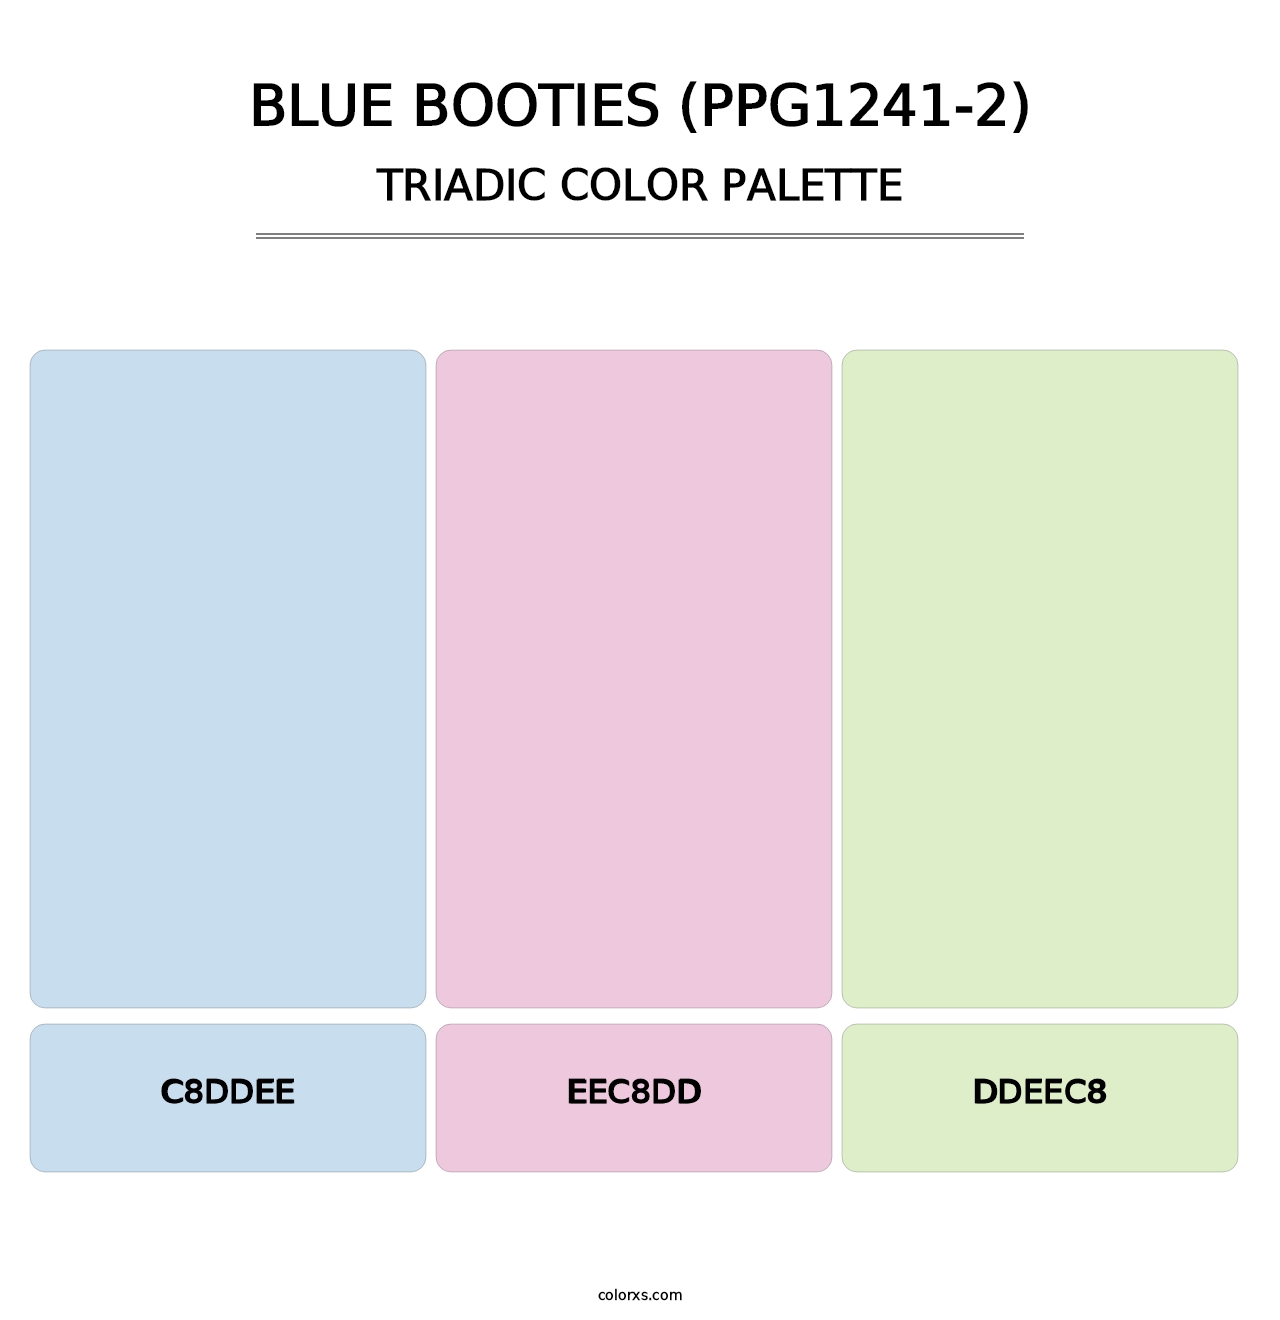 Blue Booties (PPG1241-2) - Triadic Color Palette